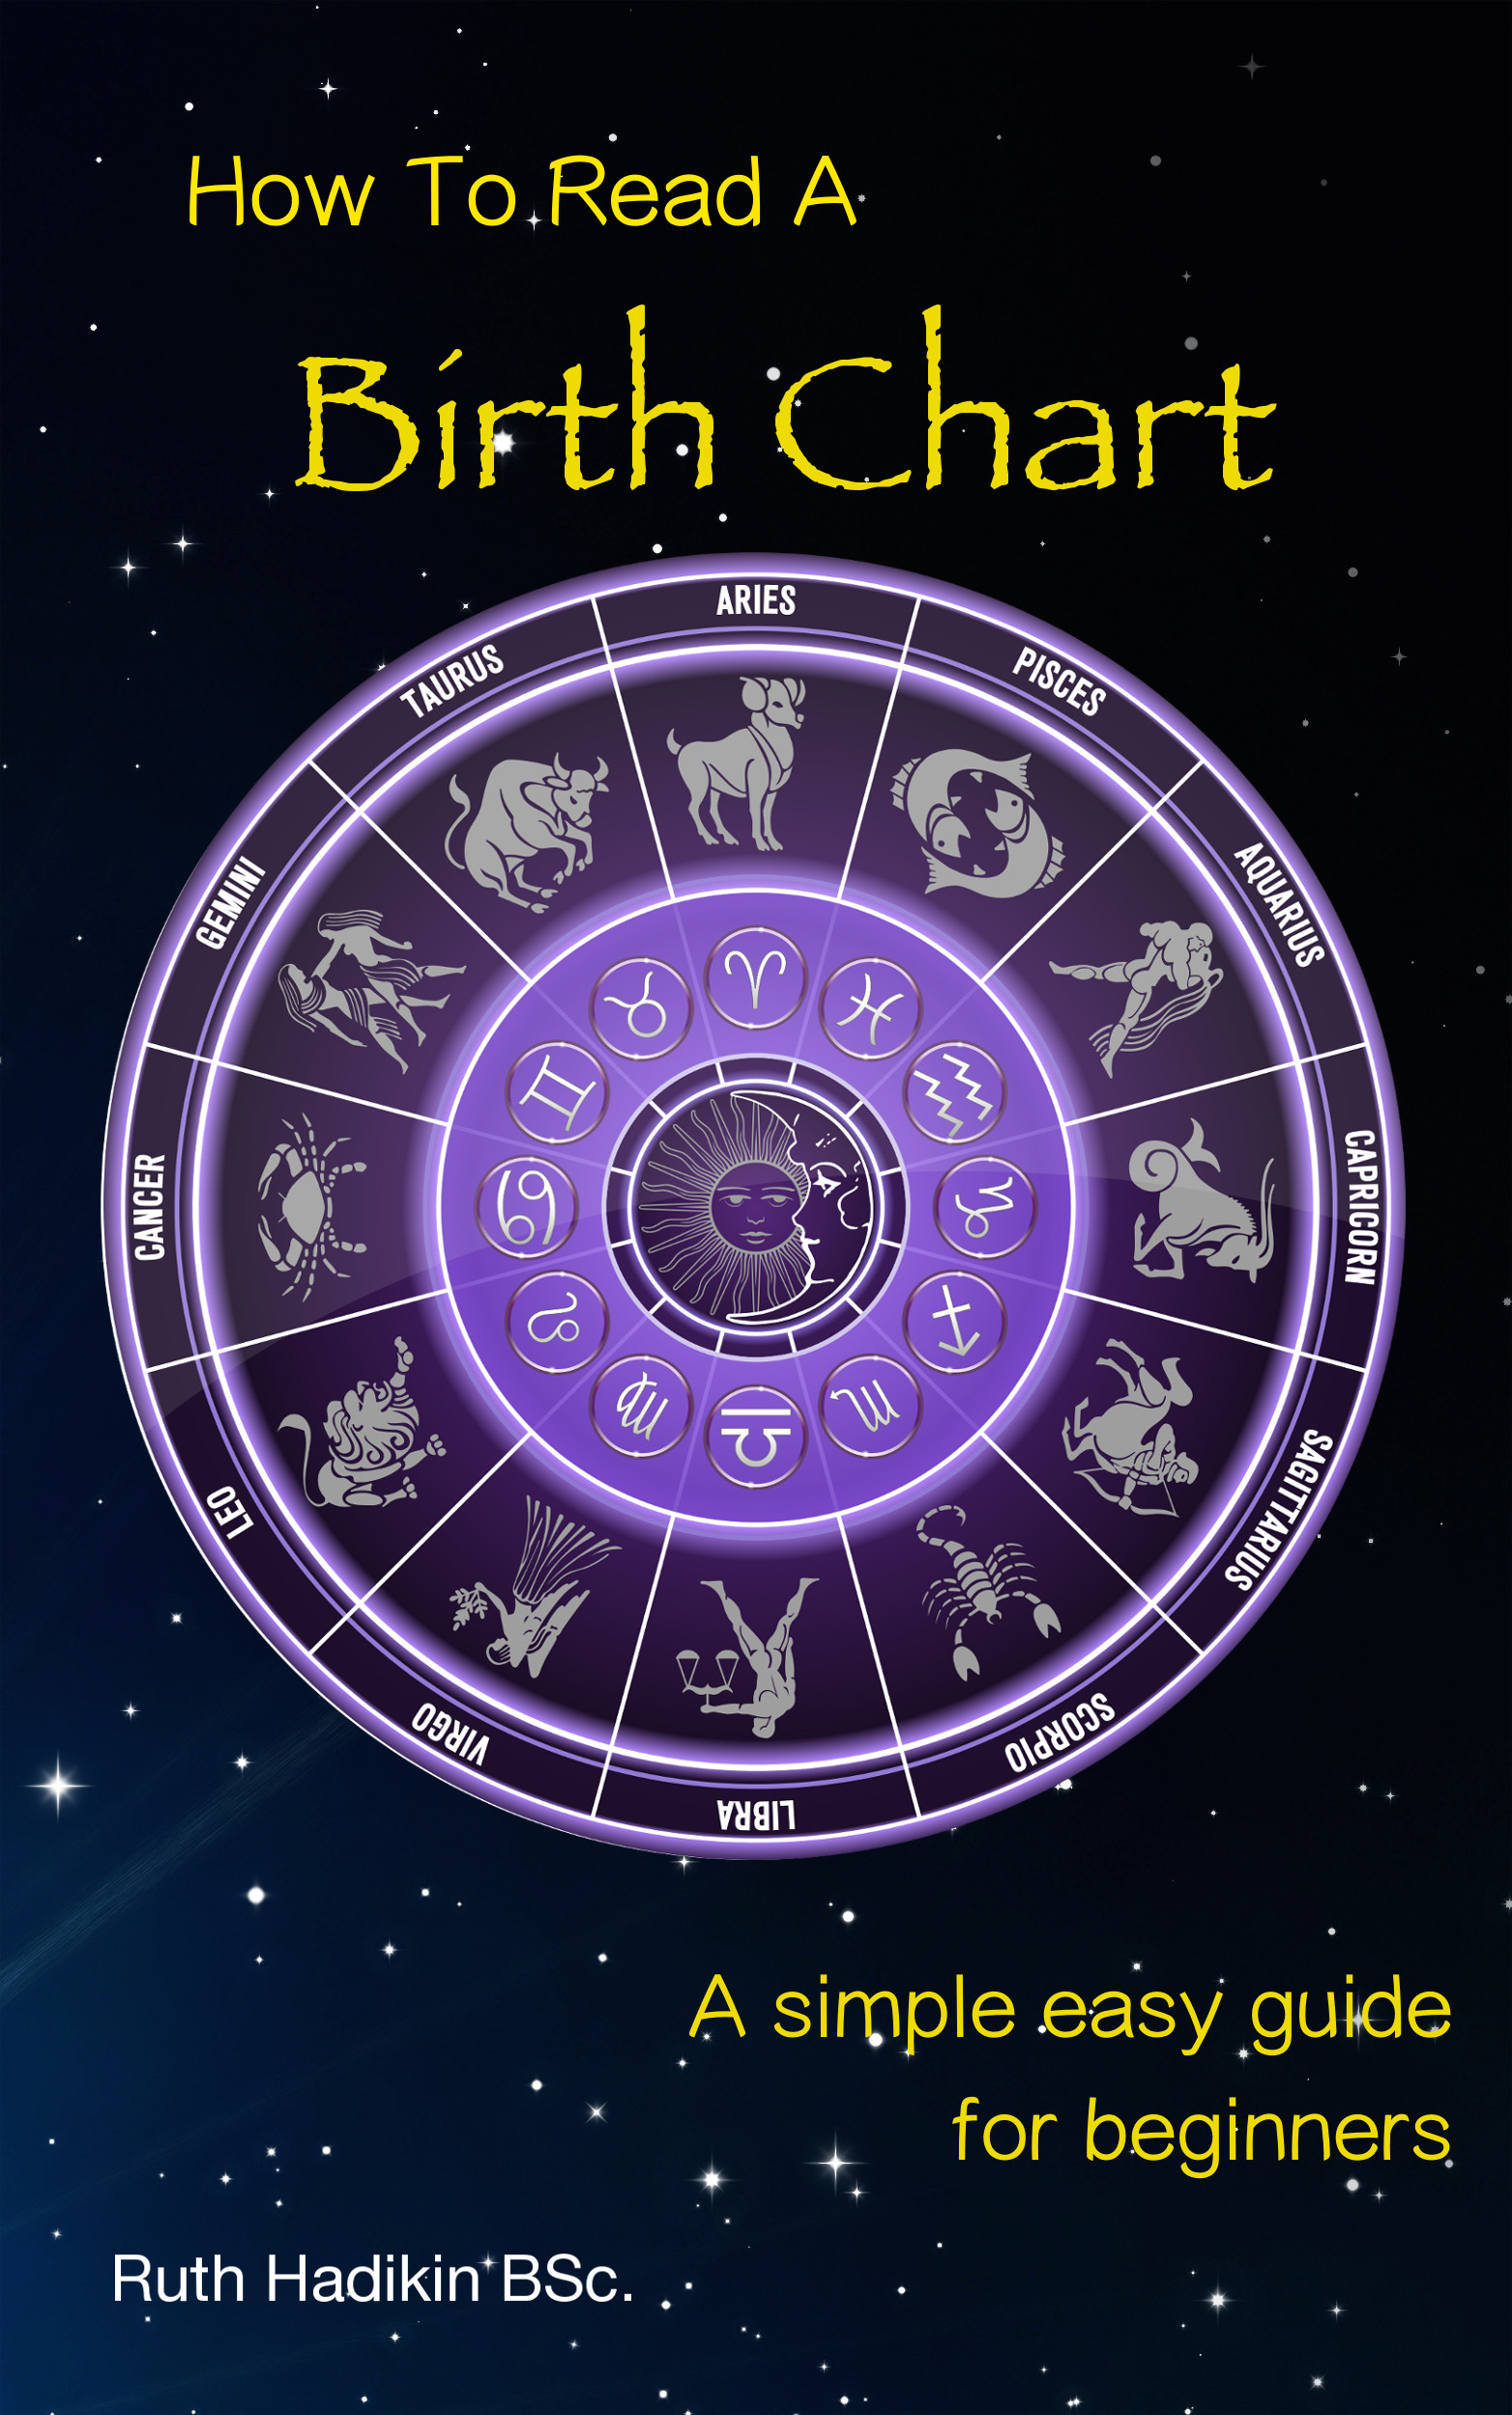 Birth Chart Book Cover Image